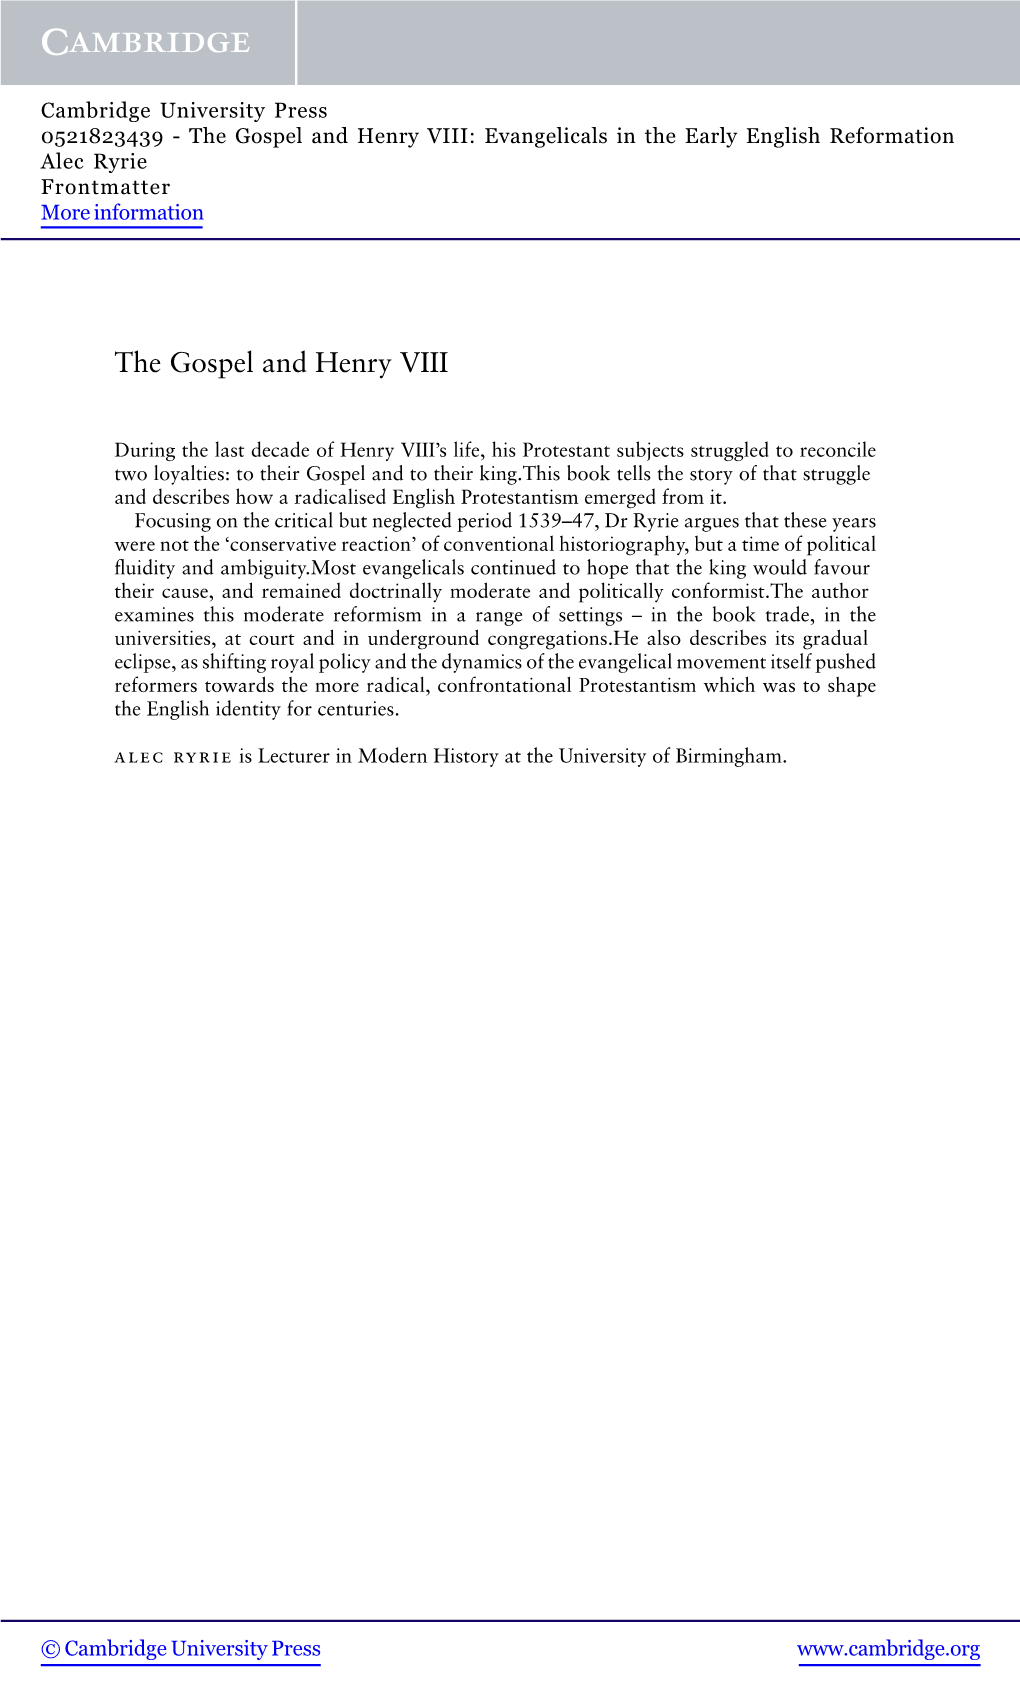 The Gospel and Henry VIII: Evangelicals in the Early English Reformation Alec Ryrie Frontmatter More Information